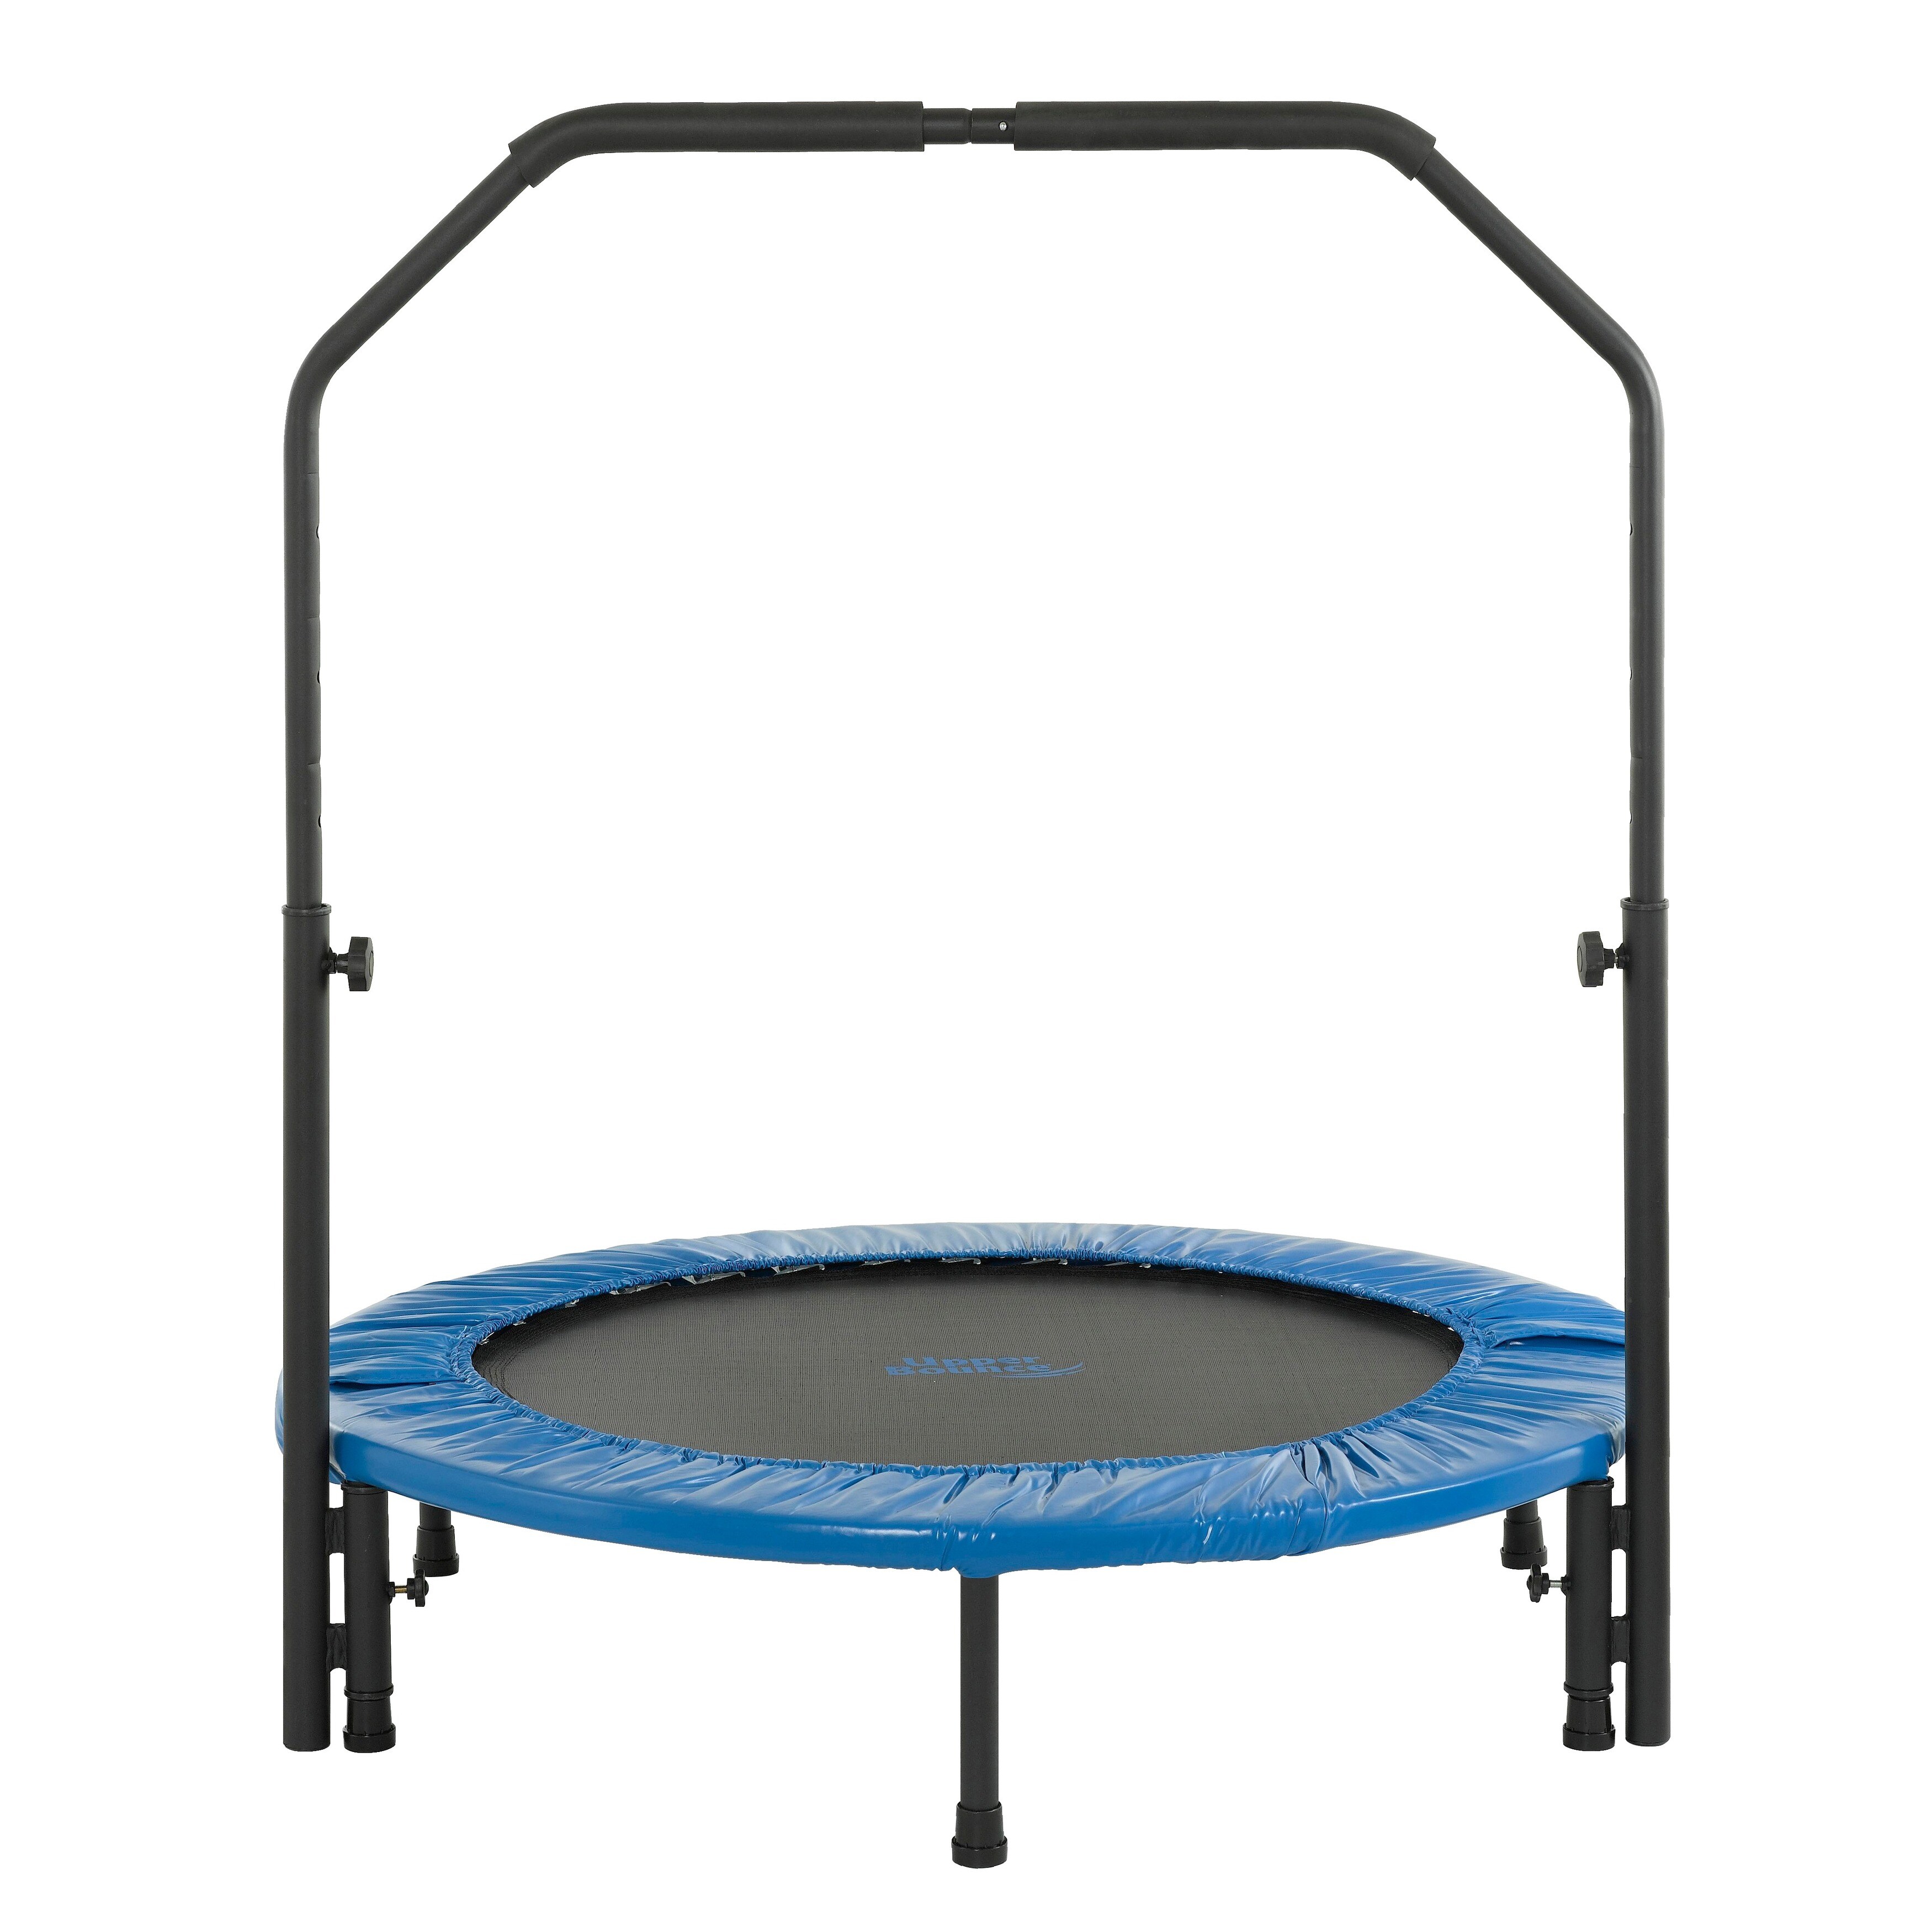 Upper Bounce 40 inch Mini Foldable Fitness Trampoline With Adjustable Handrail